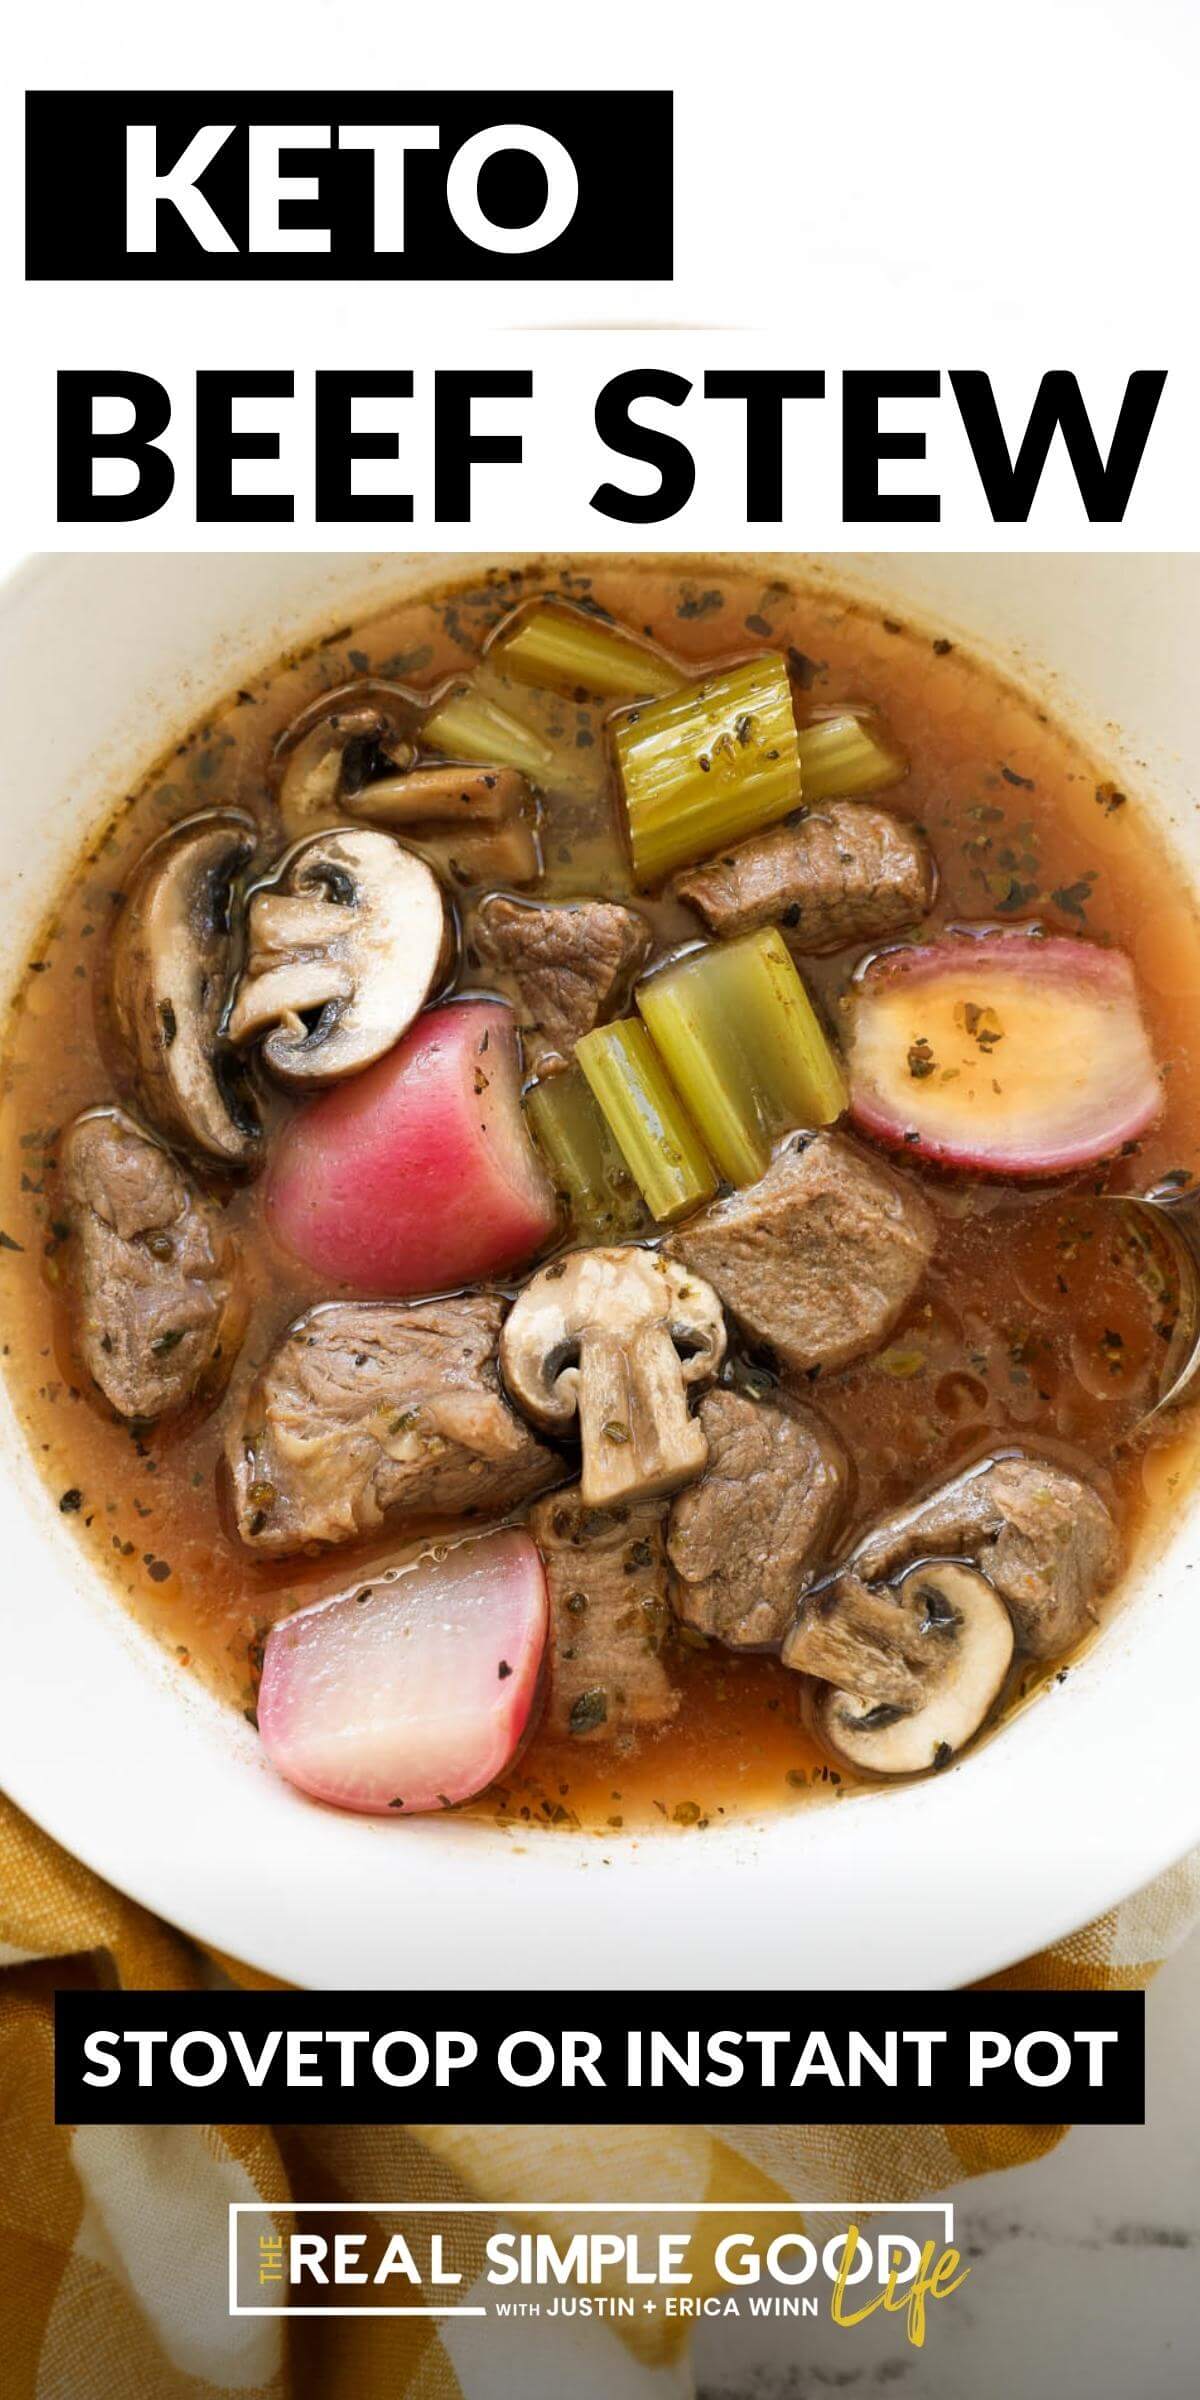 Keto Beef Stew (Stovetop or Instant Pot)